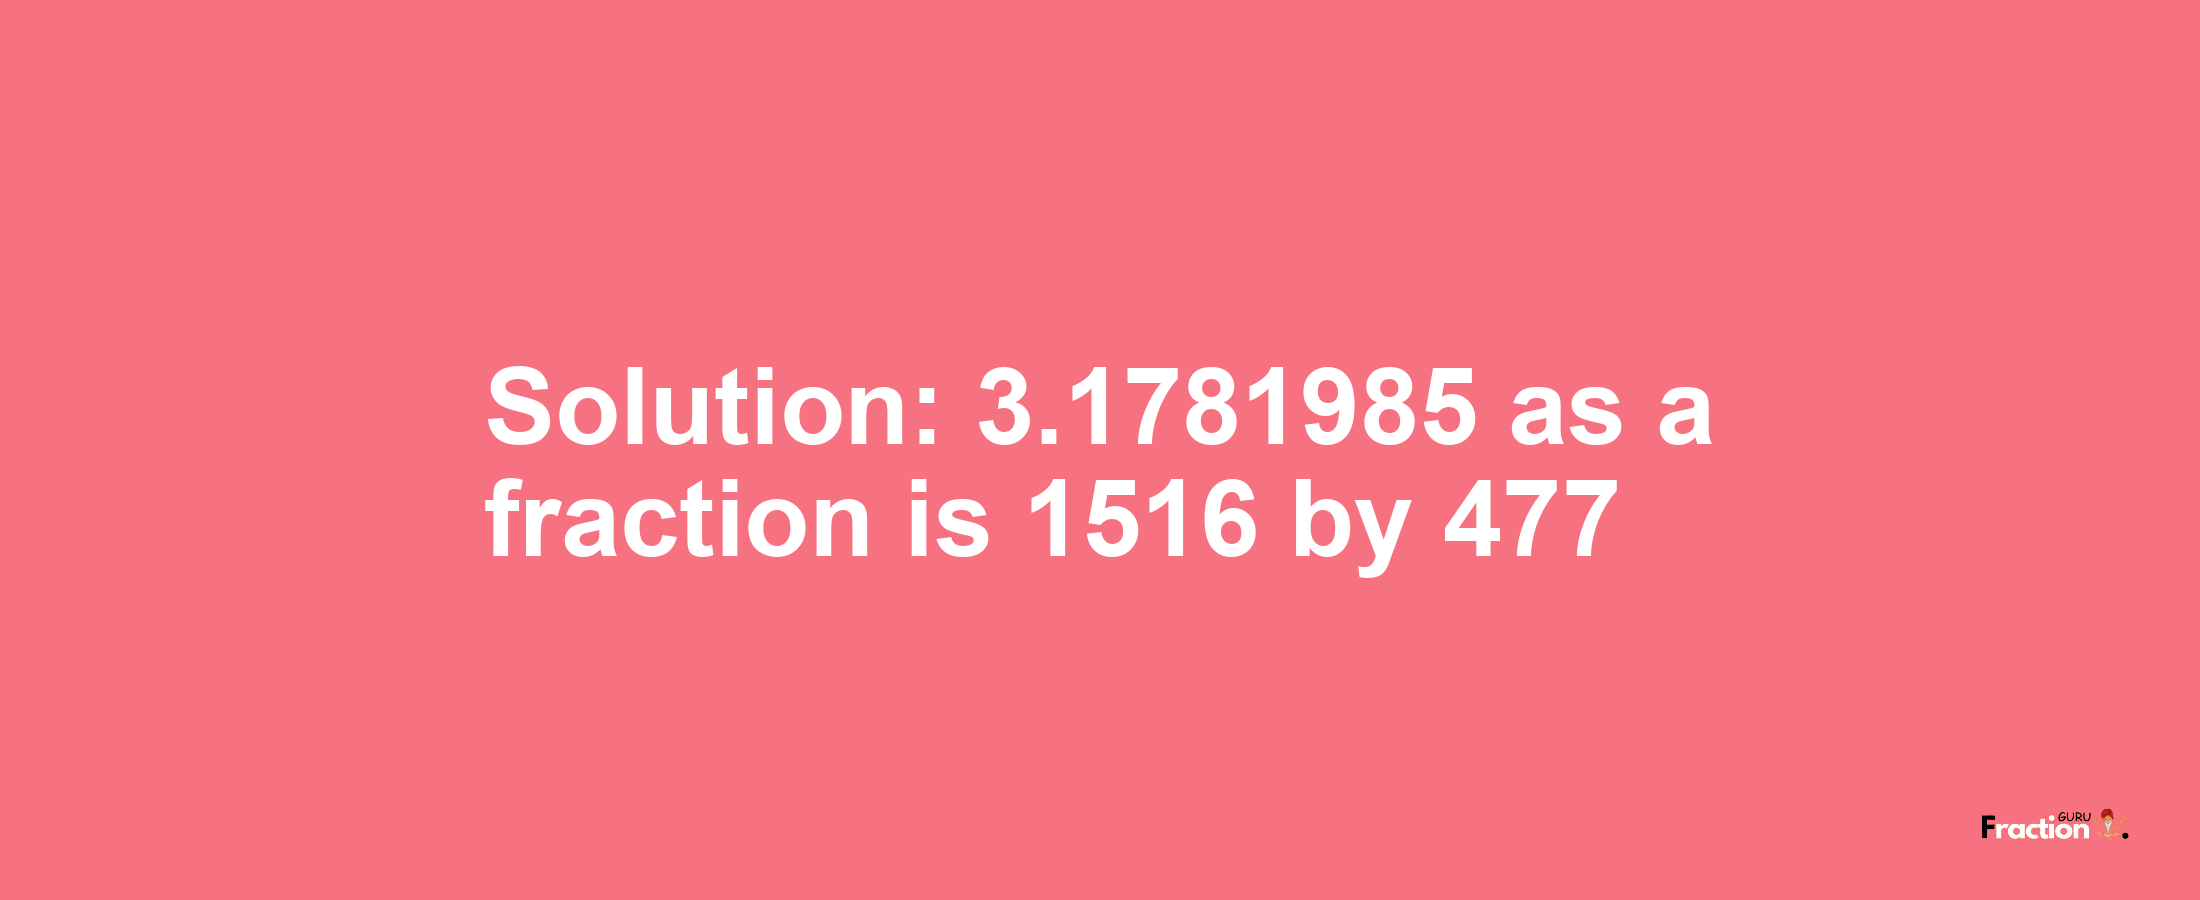 Solution:3.1781985 as a fraction is 1516/477